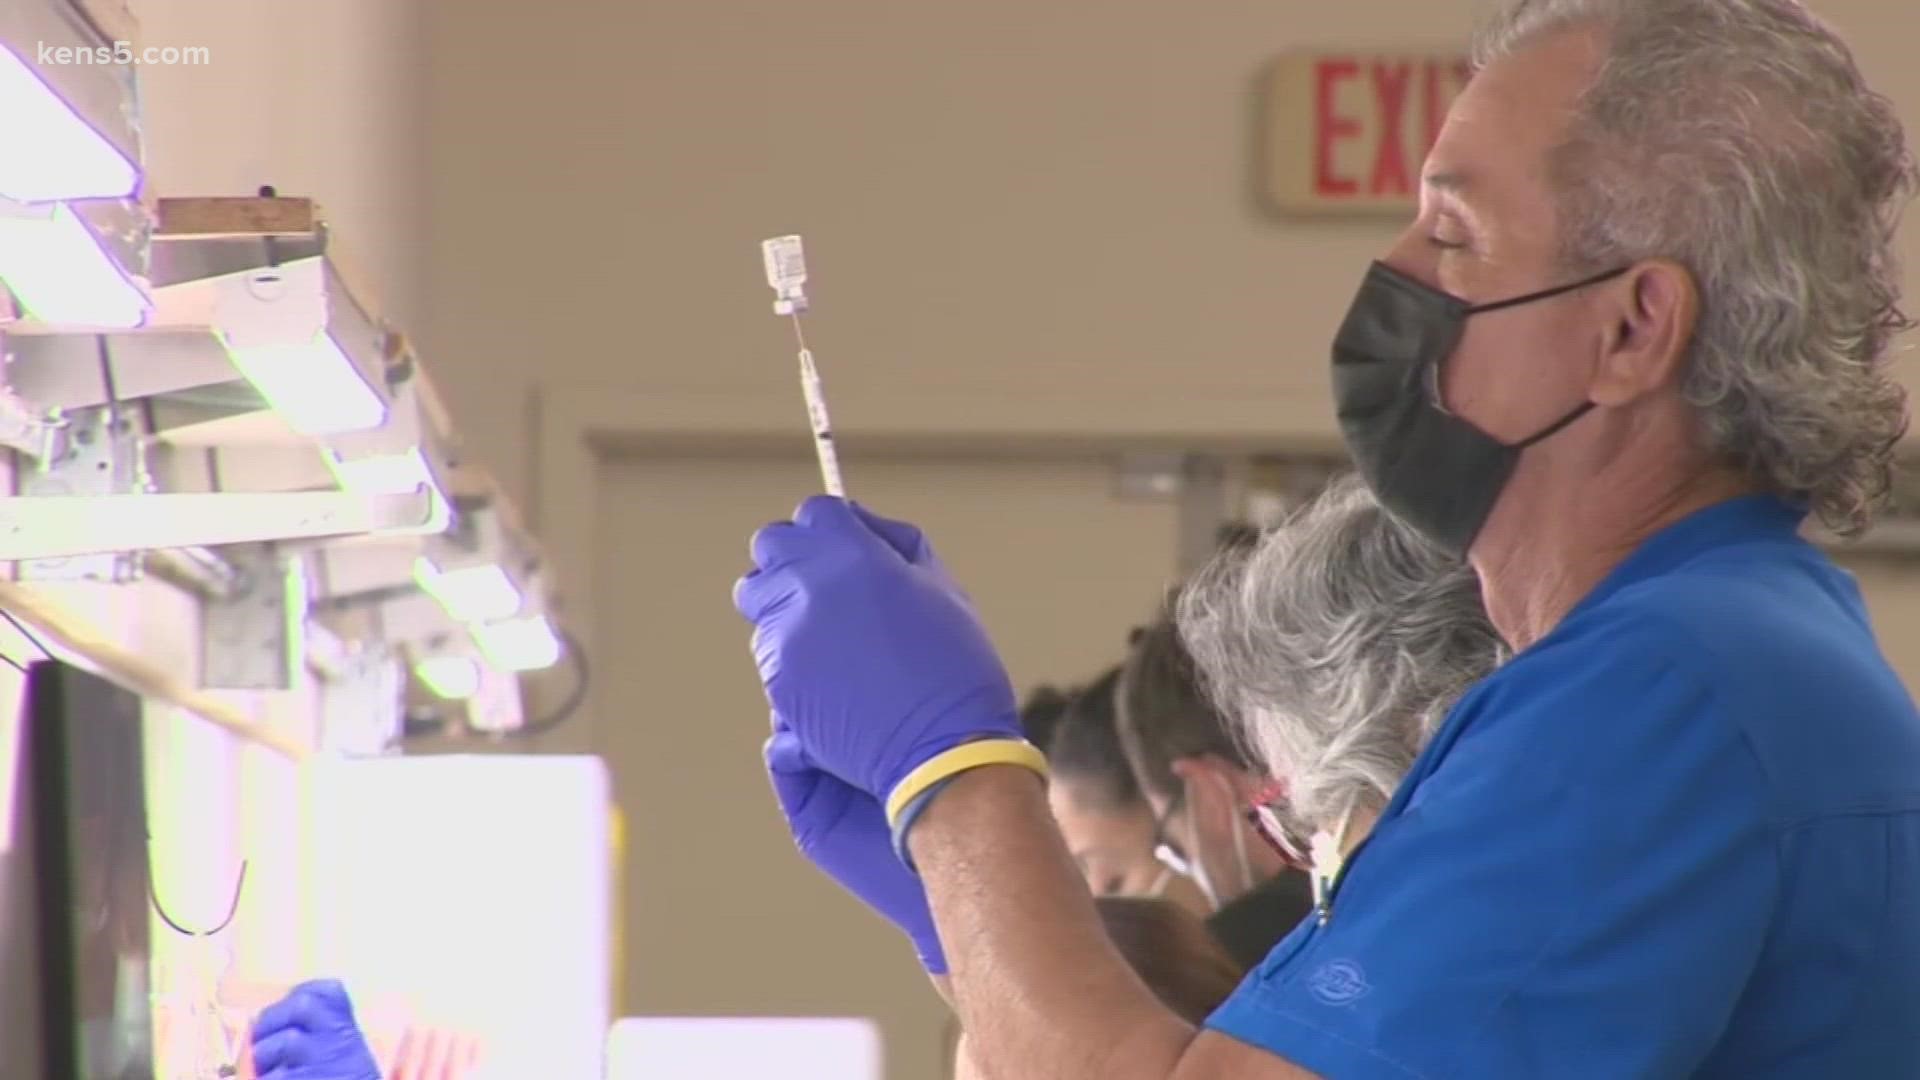 Under the mandate, all SAISD employees were to be vaccinated by Friday. That directive is now on hold.